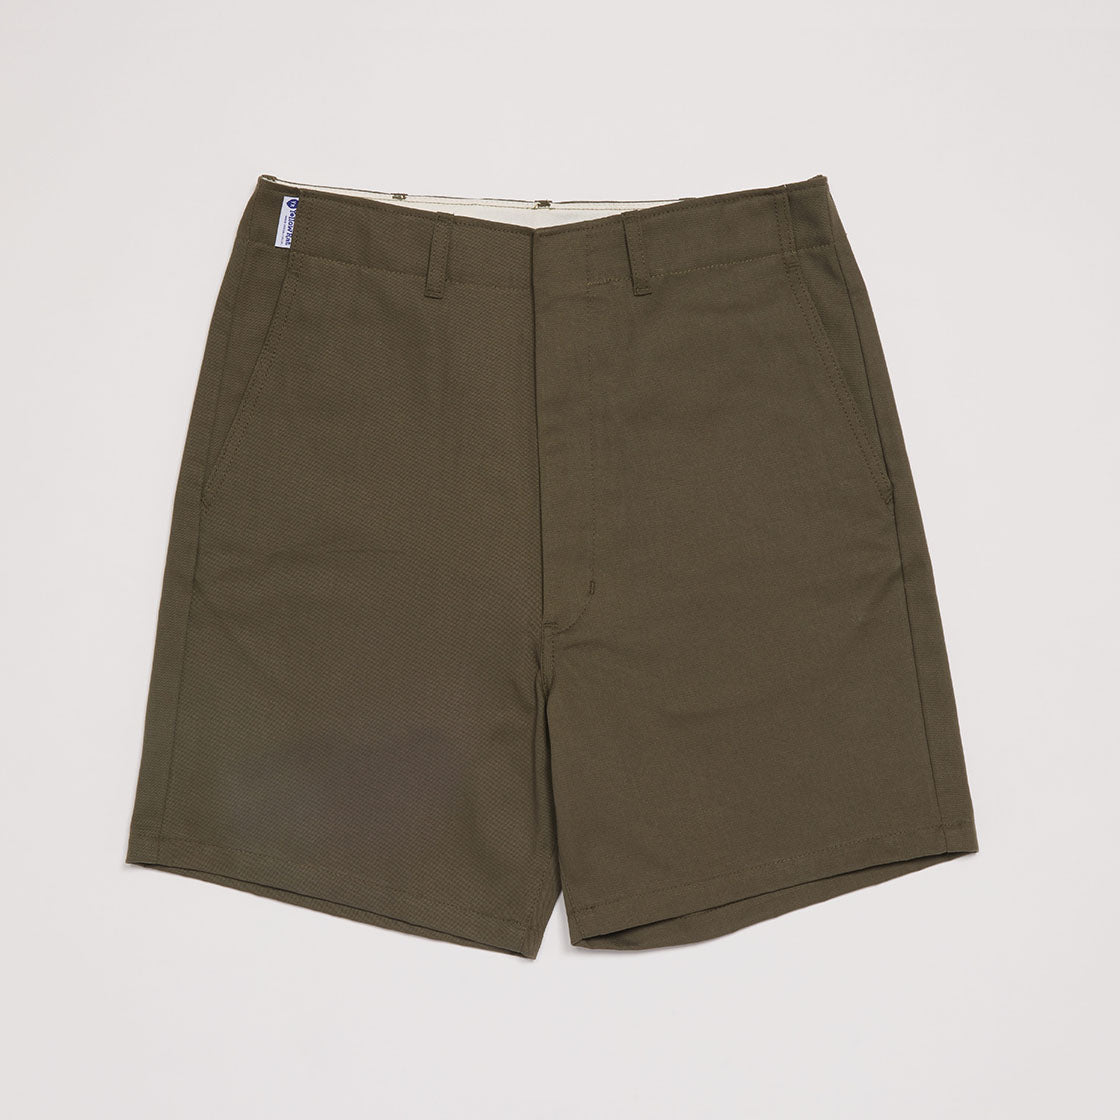 New Boy Scout Shorts (OD Green)